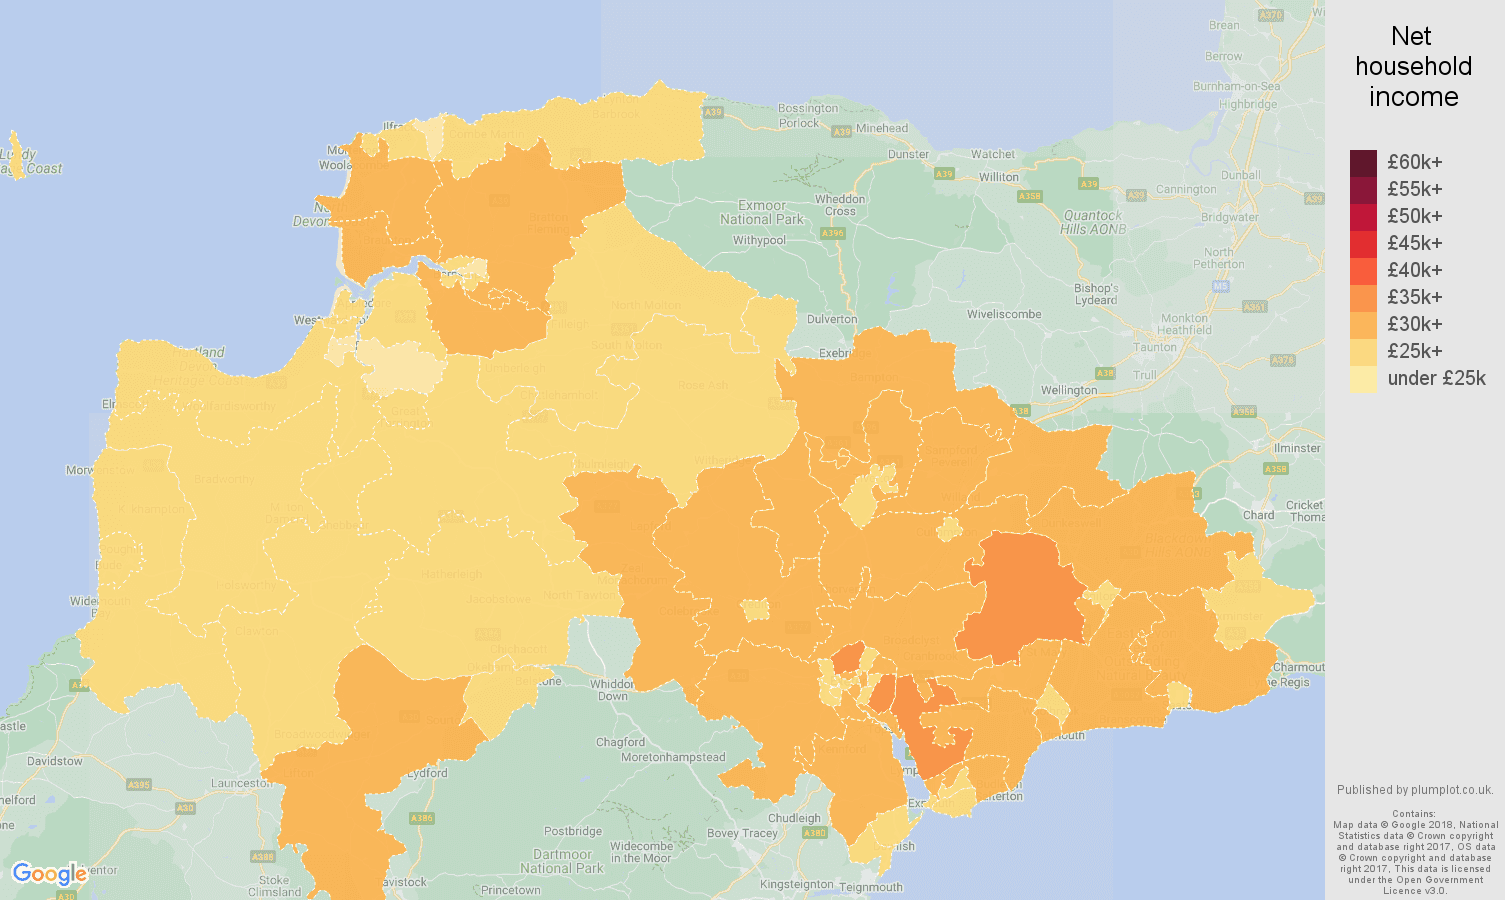 Exeter net household income map